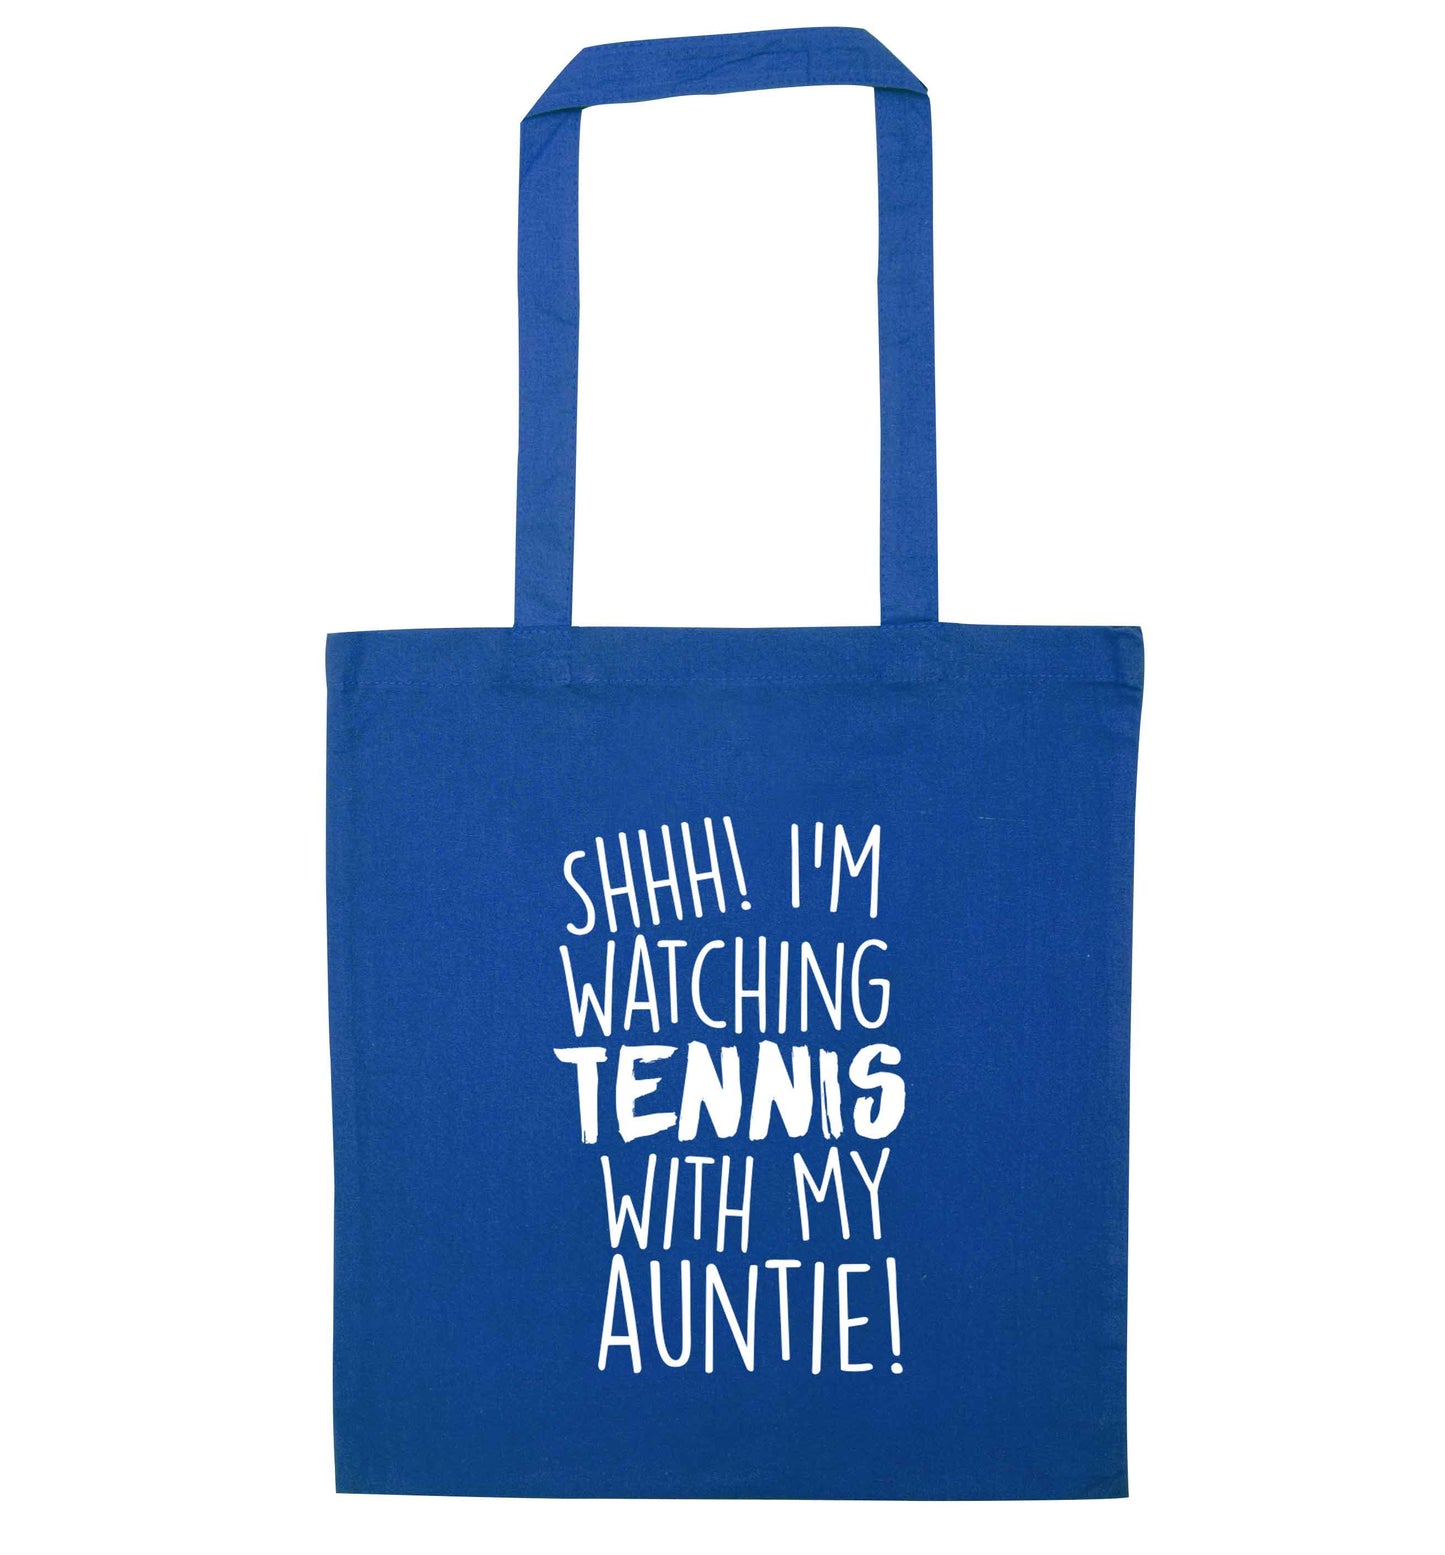 Shh! I'm watching tennis with my auntie! blue tote bag